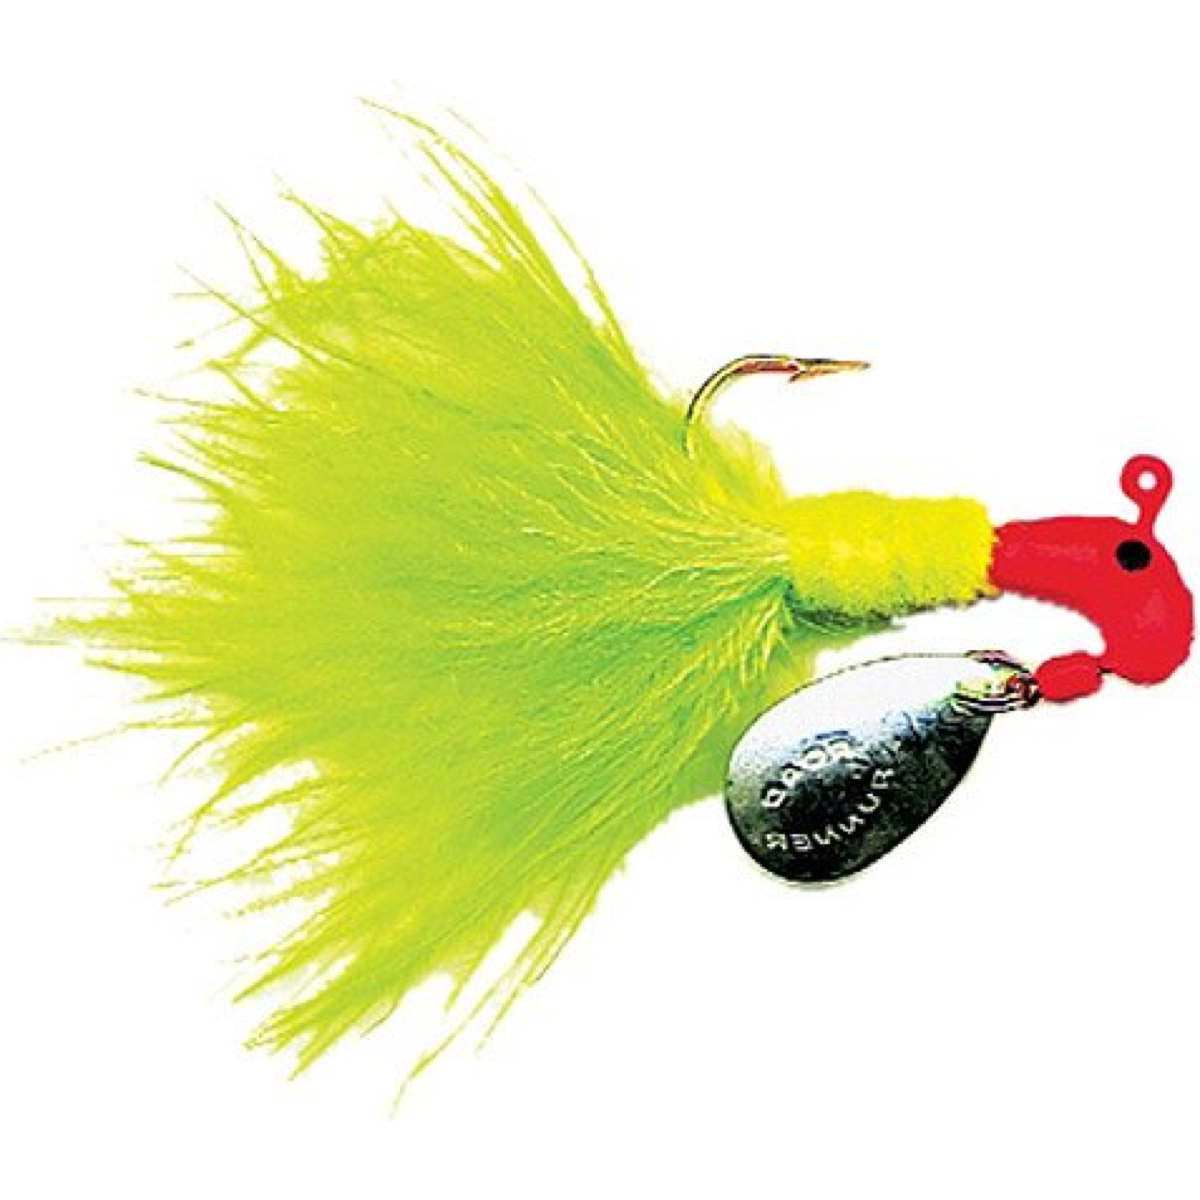 Photo of Blakemore Road Runner Marabou for sale at United Tackle Shops.